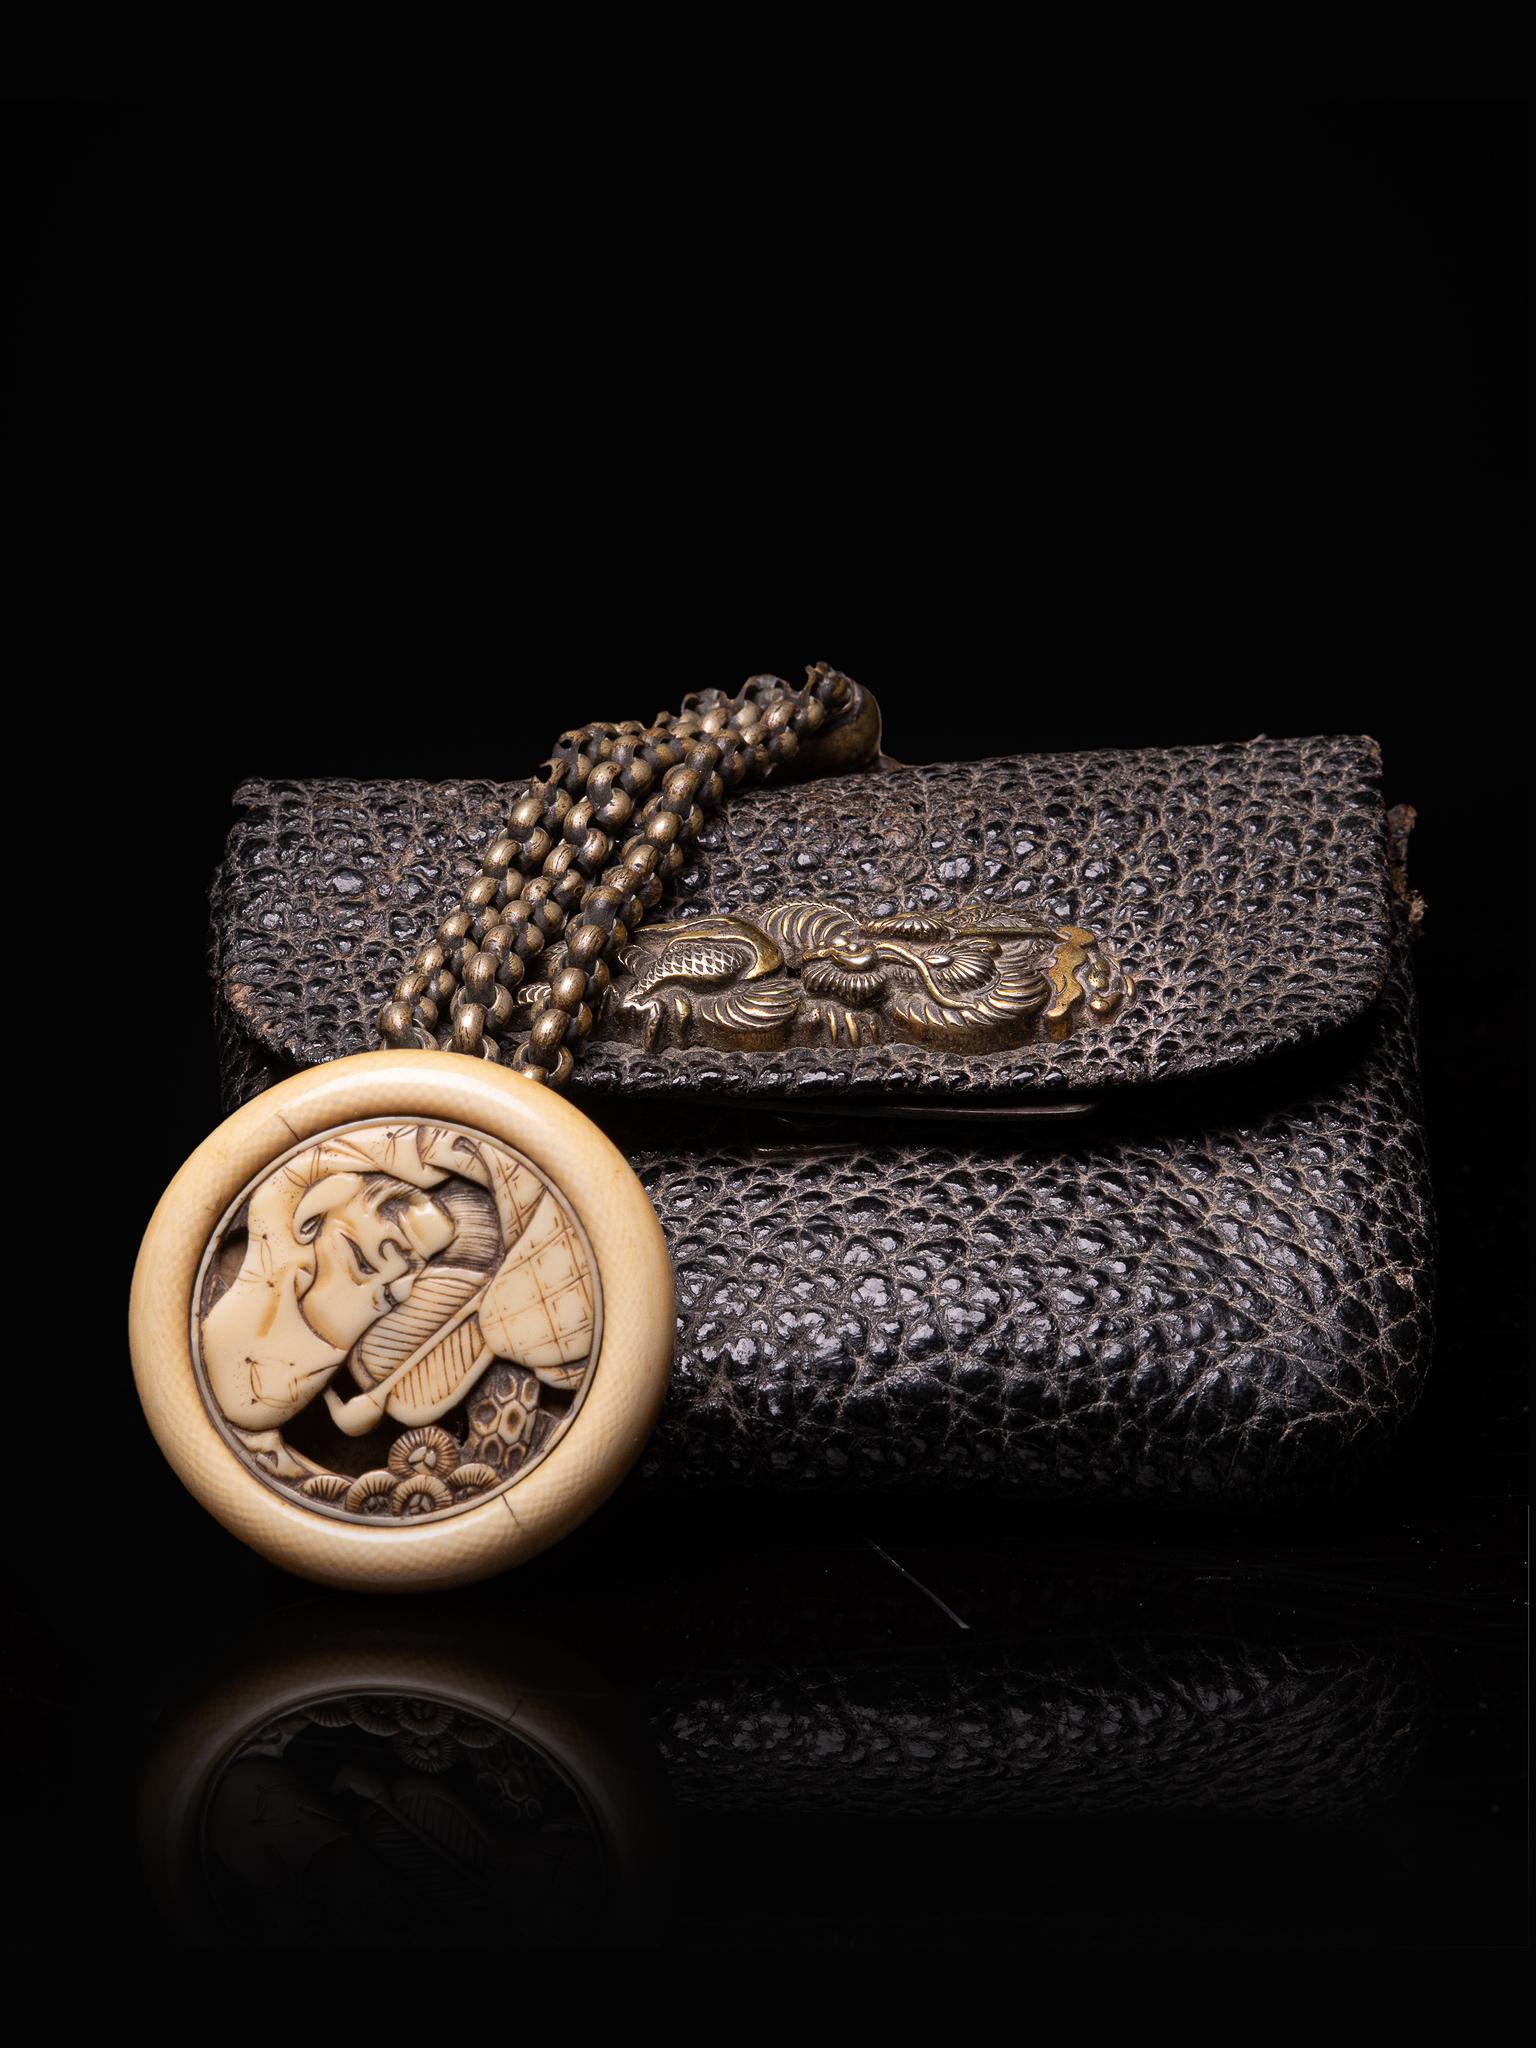 Execeptional Japanese Tobacco Pouch in Ray Skin with a Dragon-Shaped Closure - Art by Unknown